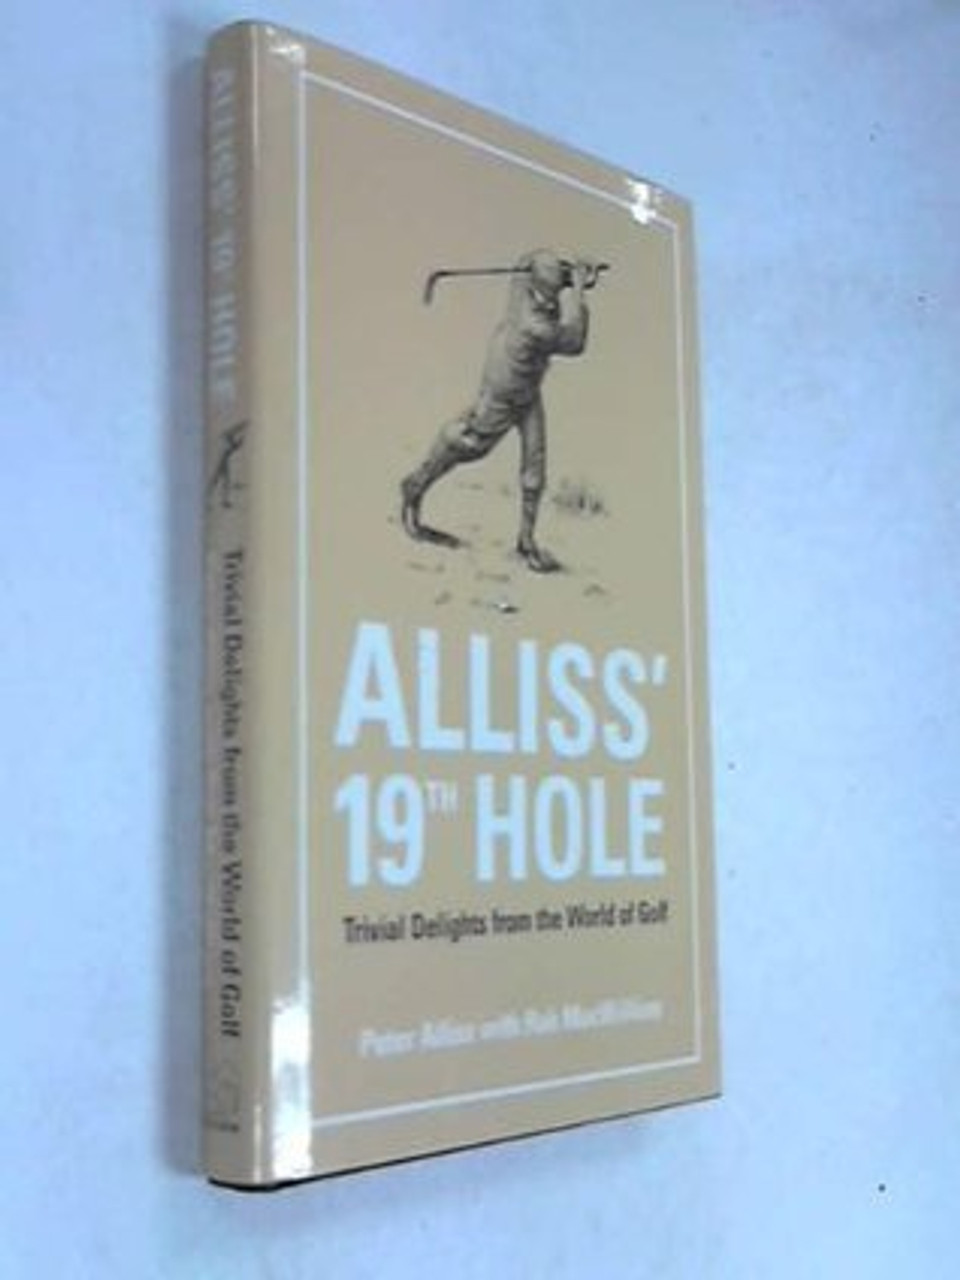 Peter Alliss , Rab MacWilliam / Alliss' 19th Hole: Trivial Delights From The World Of Golf (Hardback)